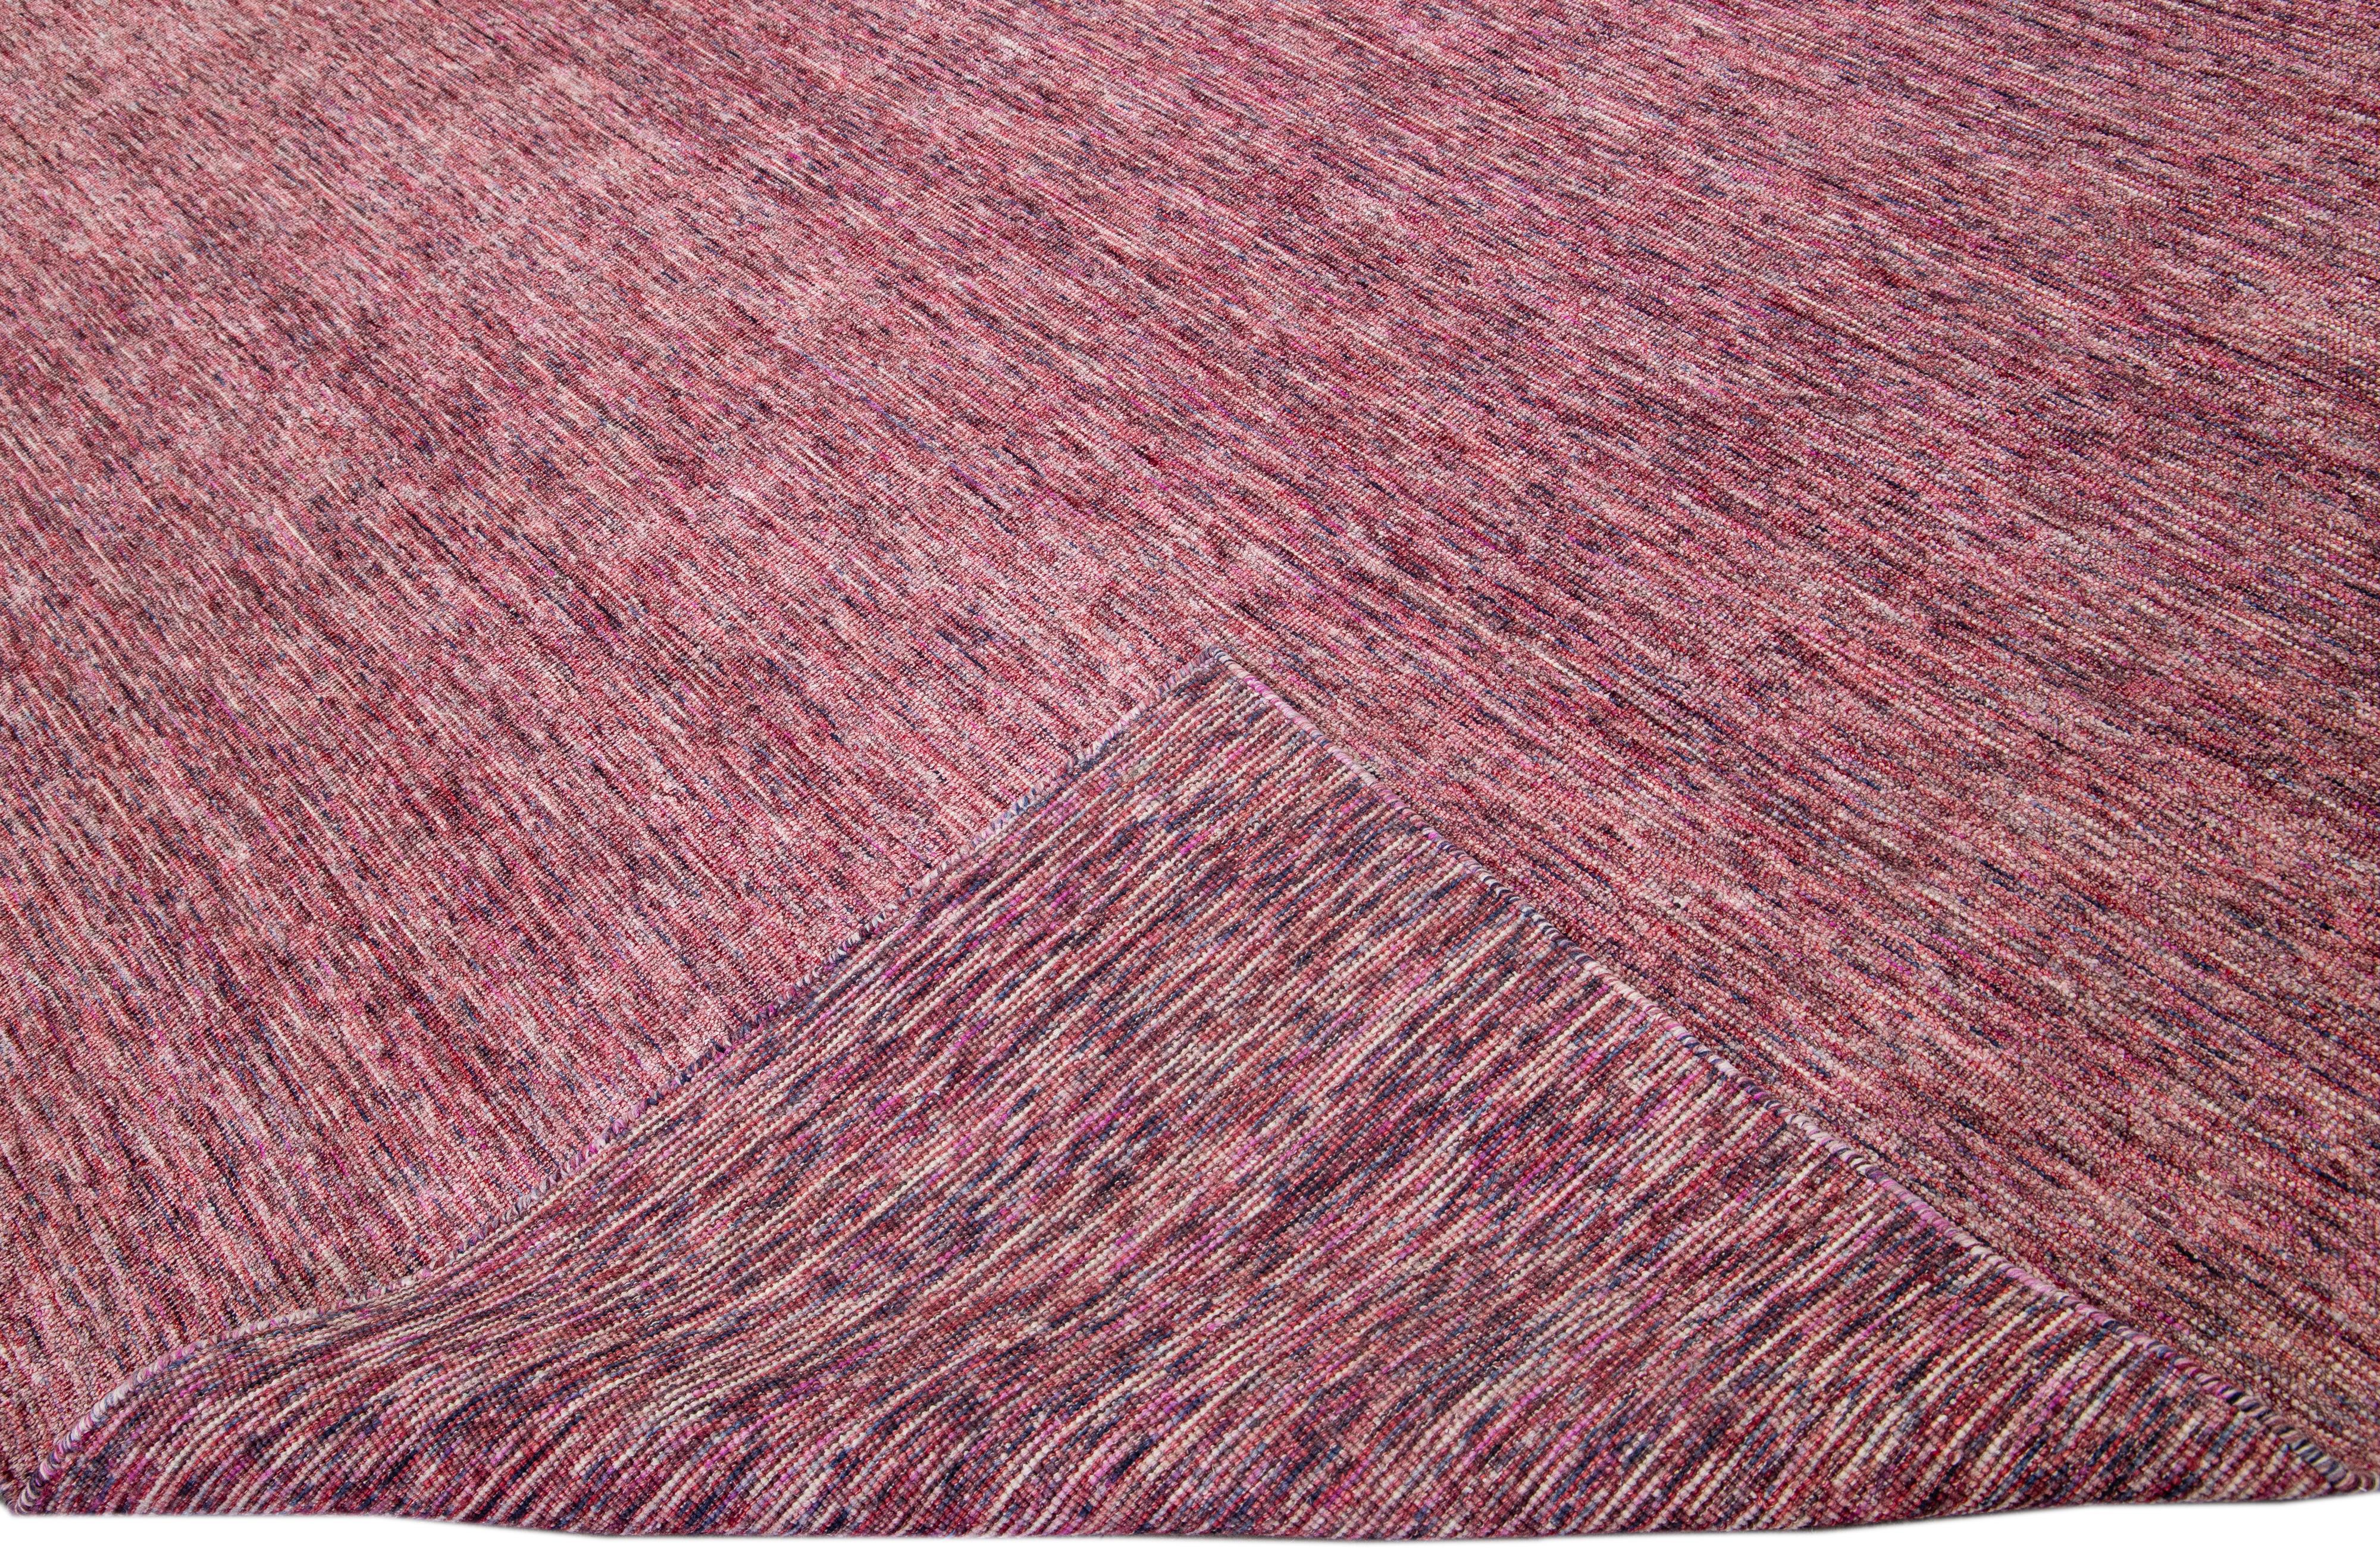 Beautiful Apadanas's handmade bamboo & silk Indian groove rug with the red field. This groove collection rug has an all-over solid design.

This rug measures: 12' x 15'.

Custom colors and sizes are available upon request.

